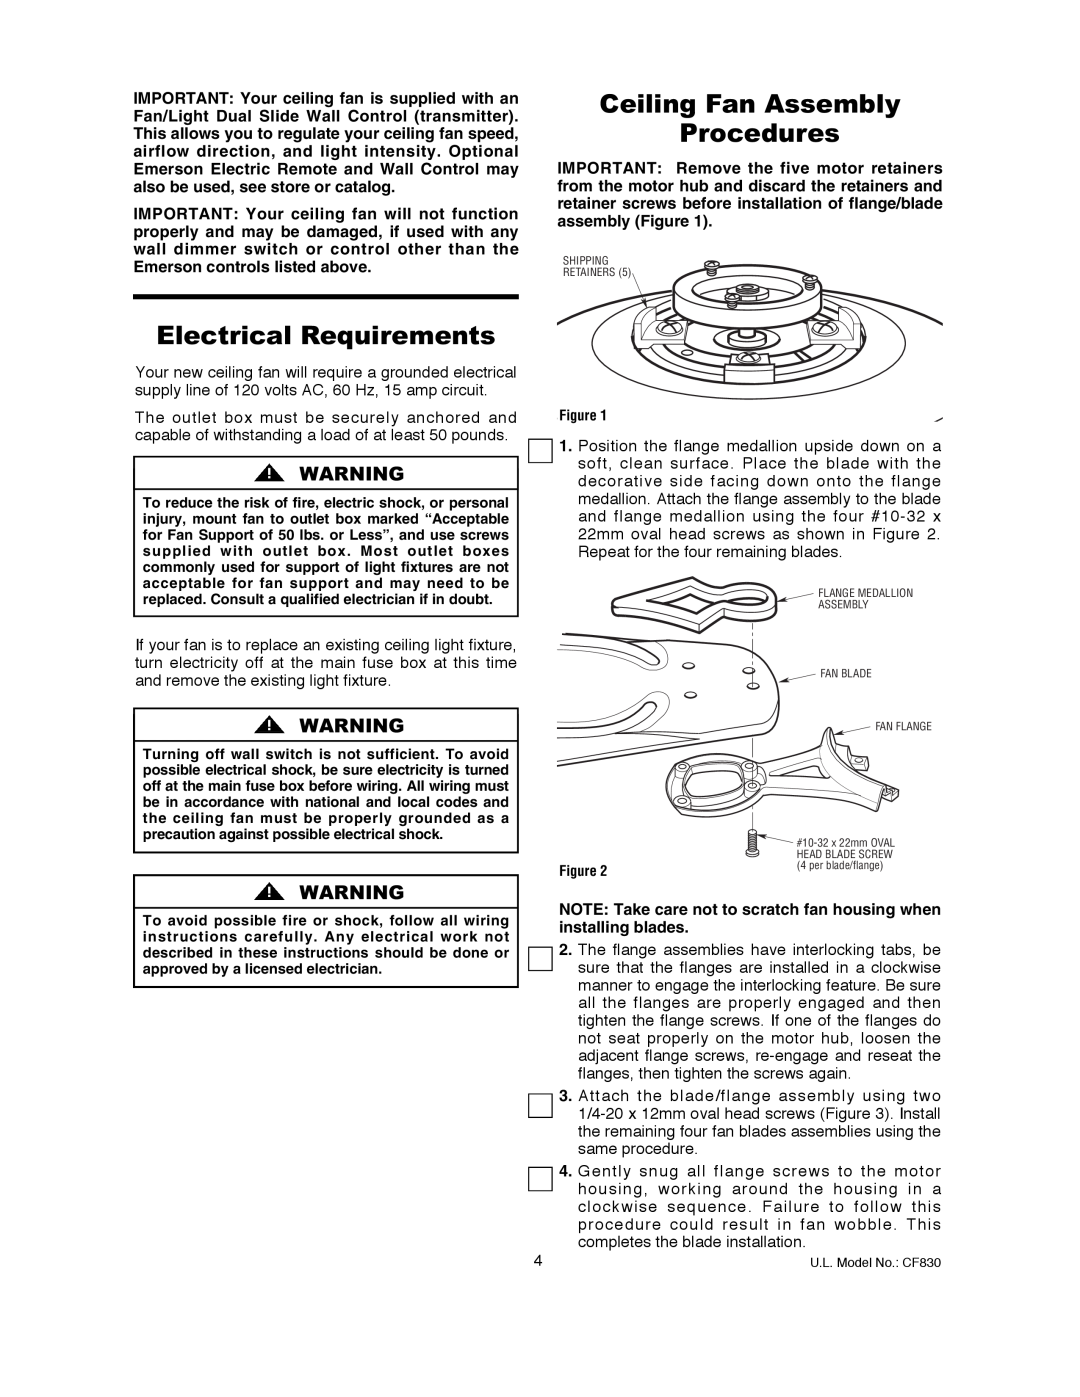 Emerson CF830GES00 owner manual Electrical Requirements, Ceiling Fan Assembly Procedures 